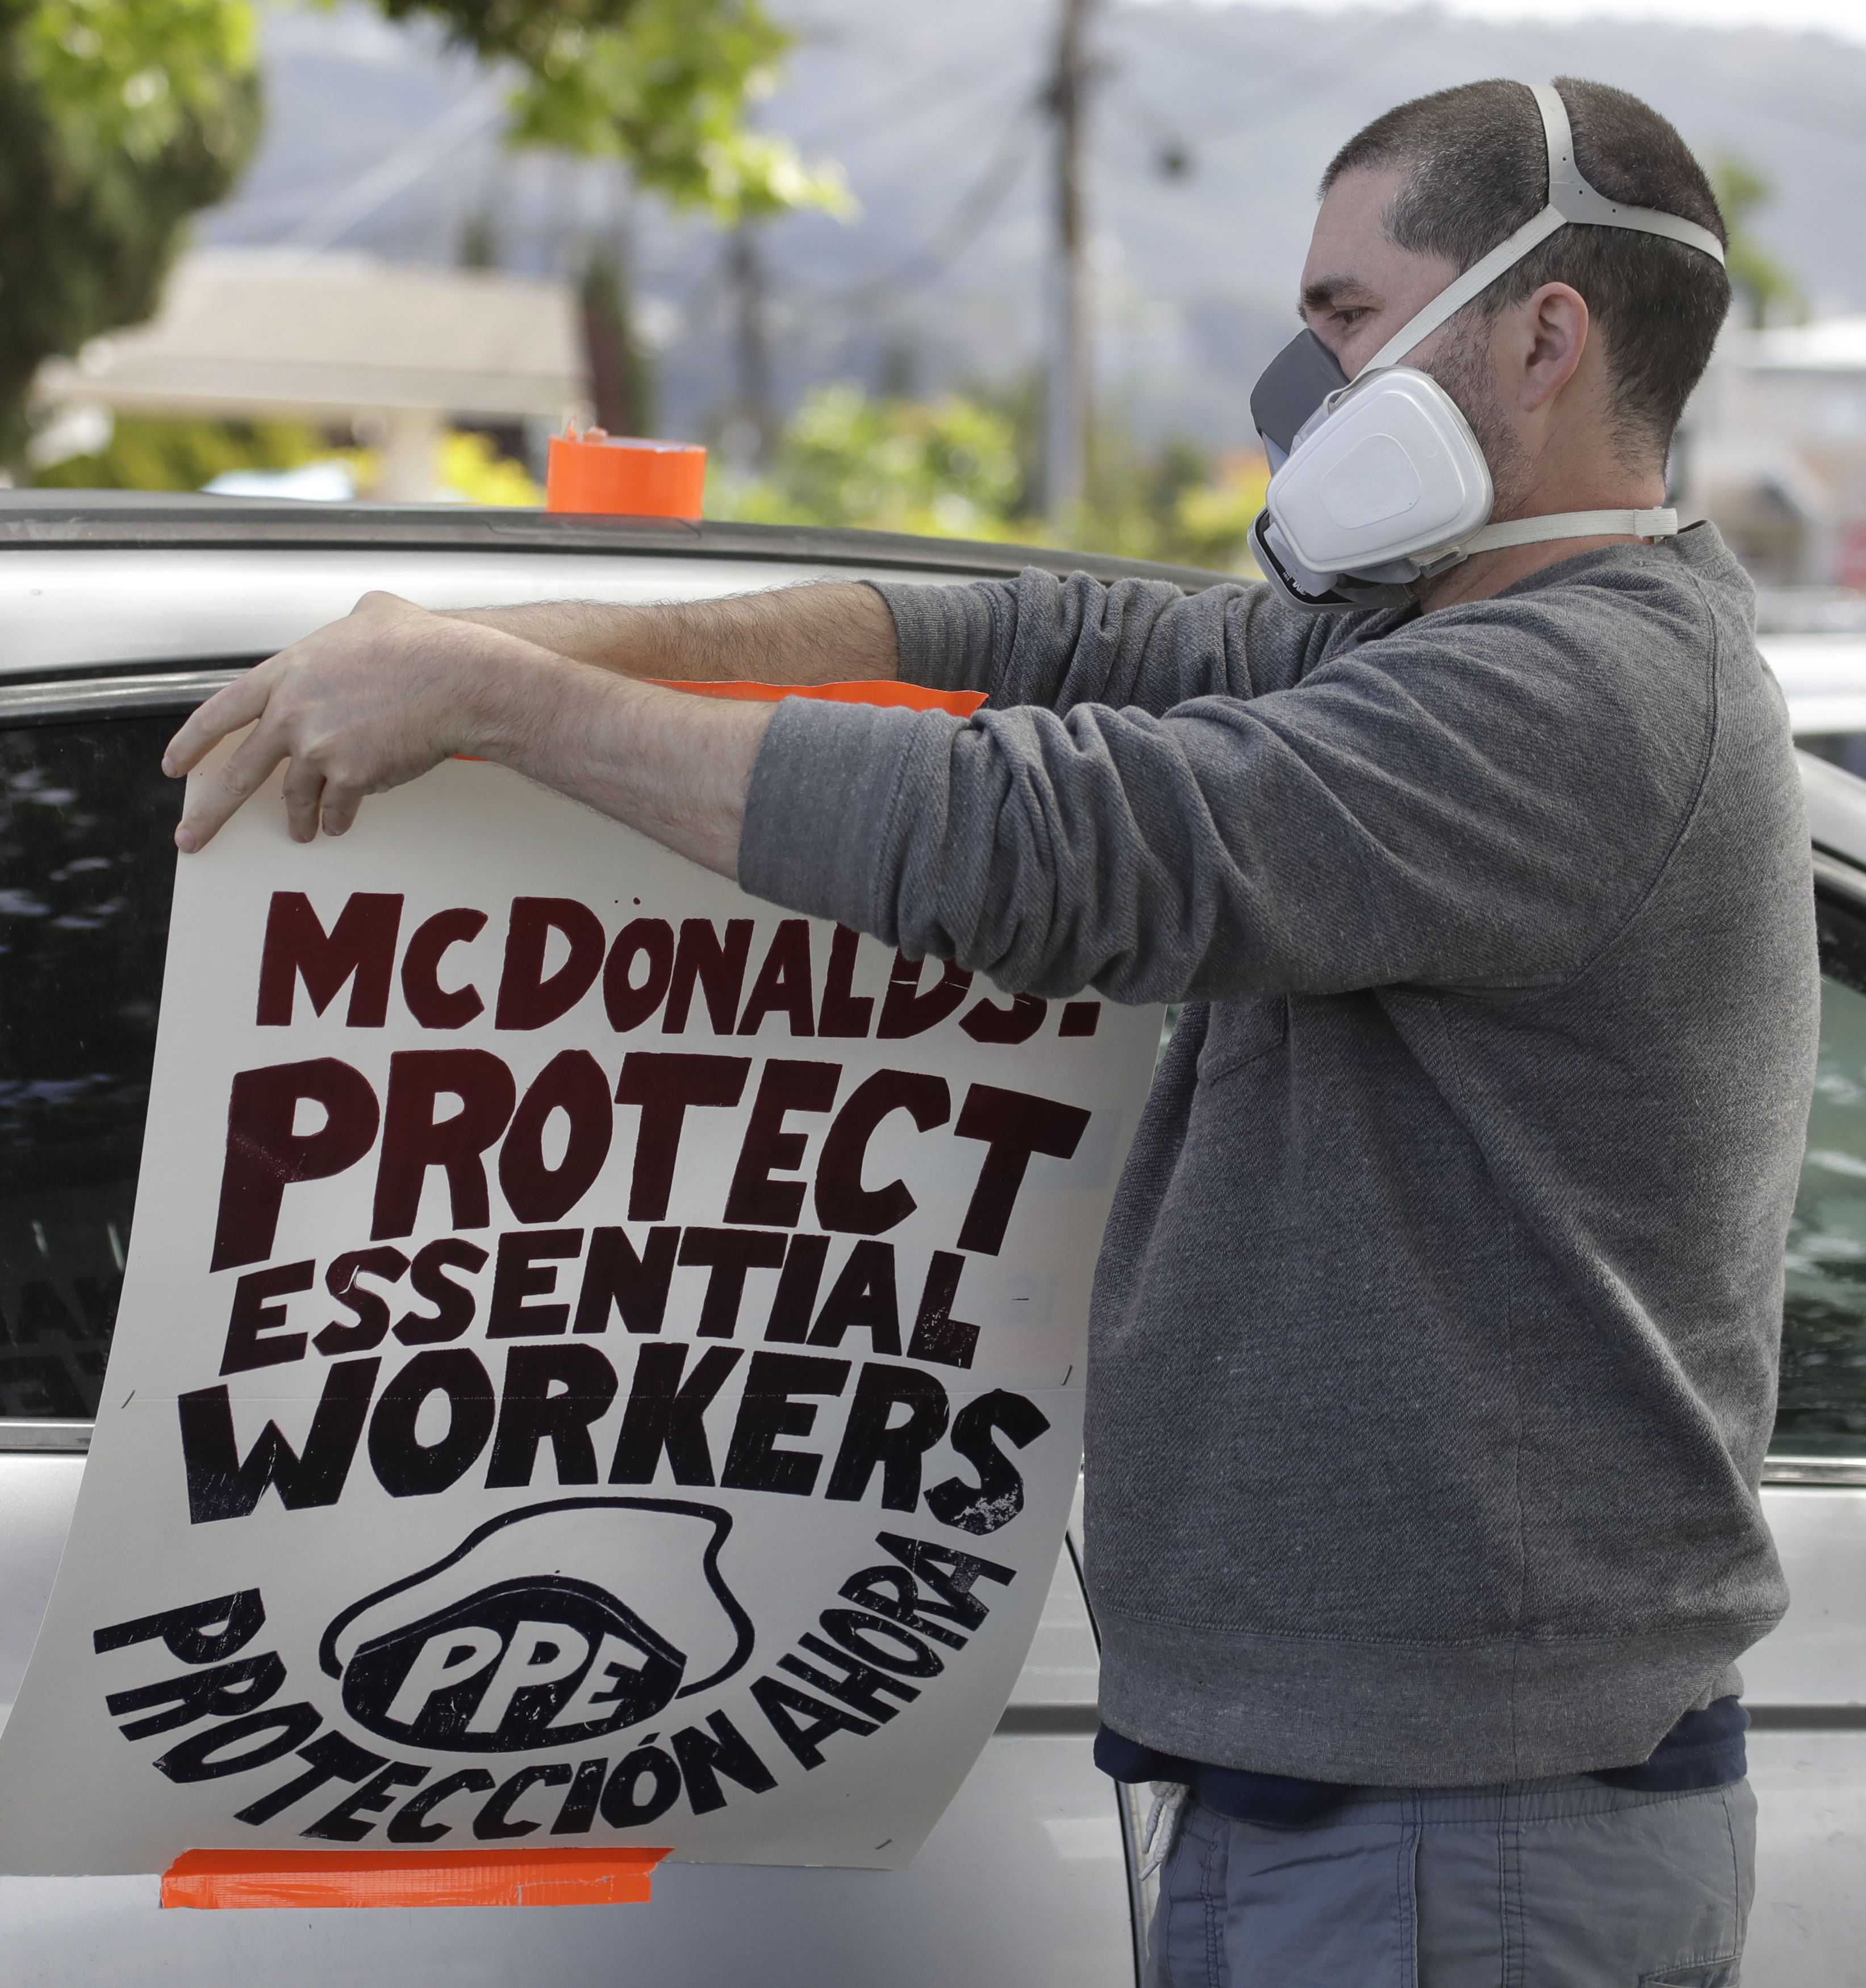 A man protests what he claims is a lack of personal protective equipment for McDonald's employees on Tuesday, April 21, 2020, in Oakland, Calif. (AP Photo/Ben Margot)